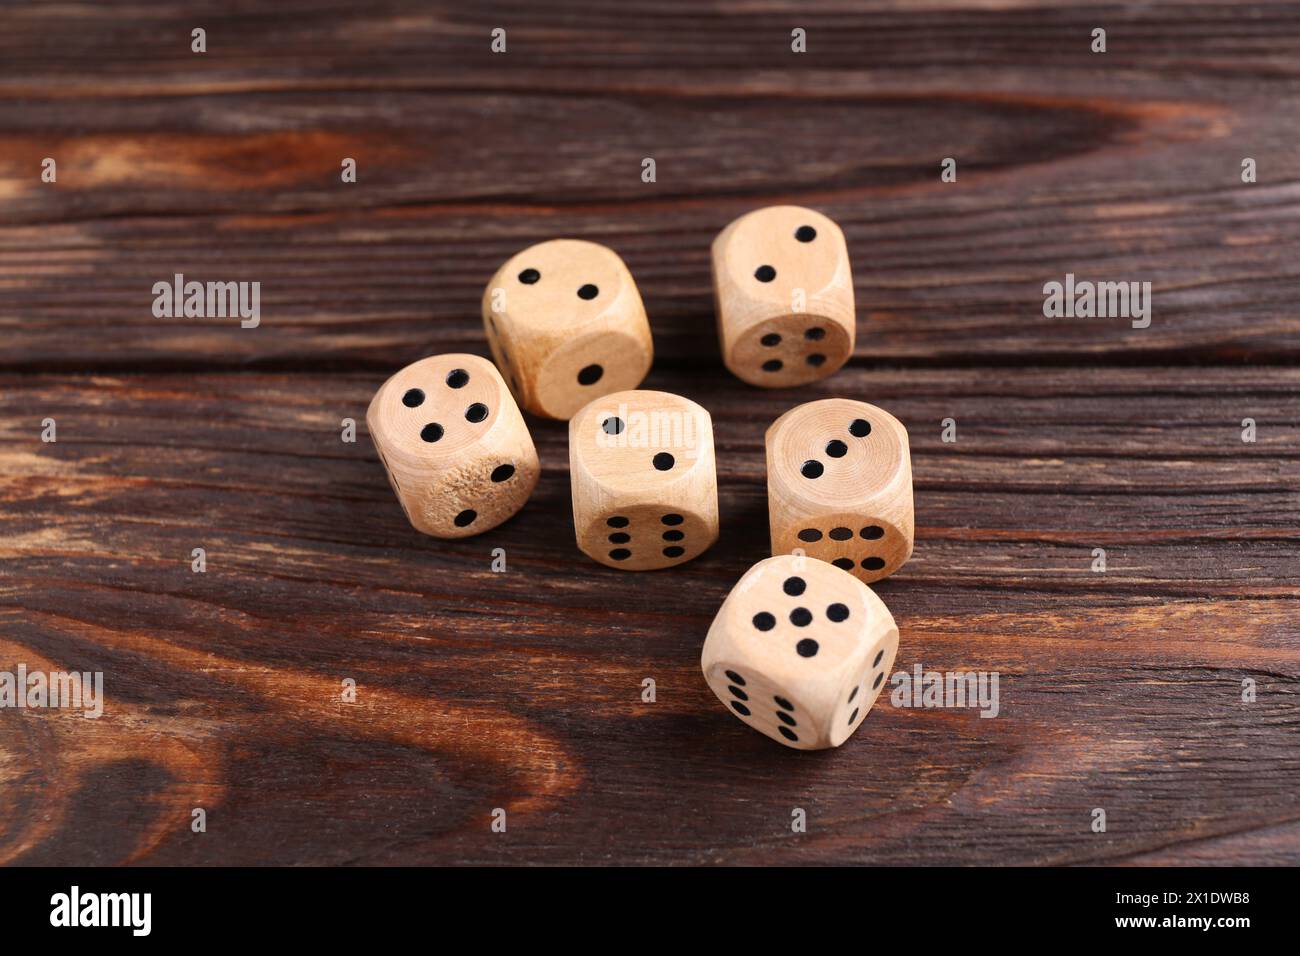 Many dices on wooden table. Game cubes Stock Photo